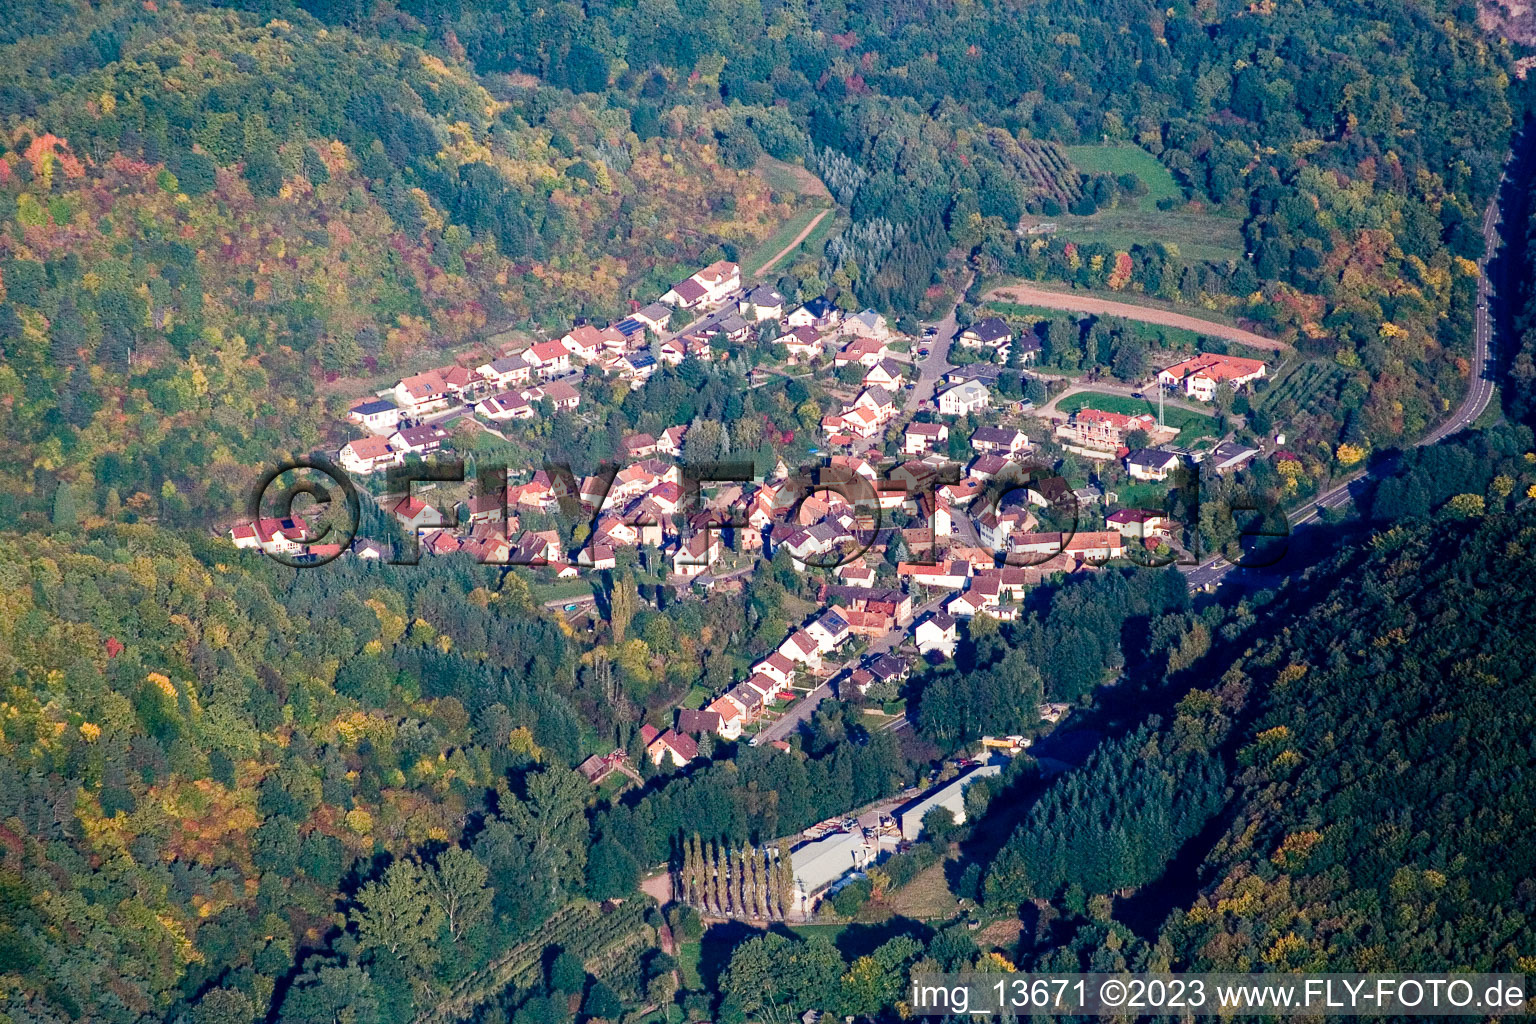 Waldhambach in the state Rhineland-Palatinate, Germany seen from above